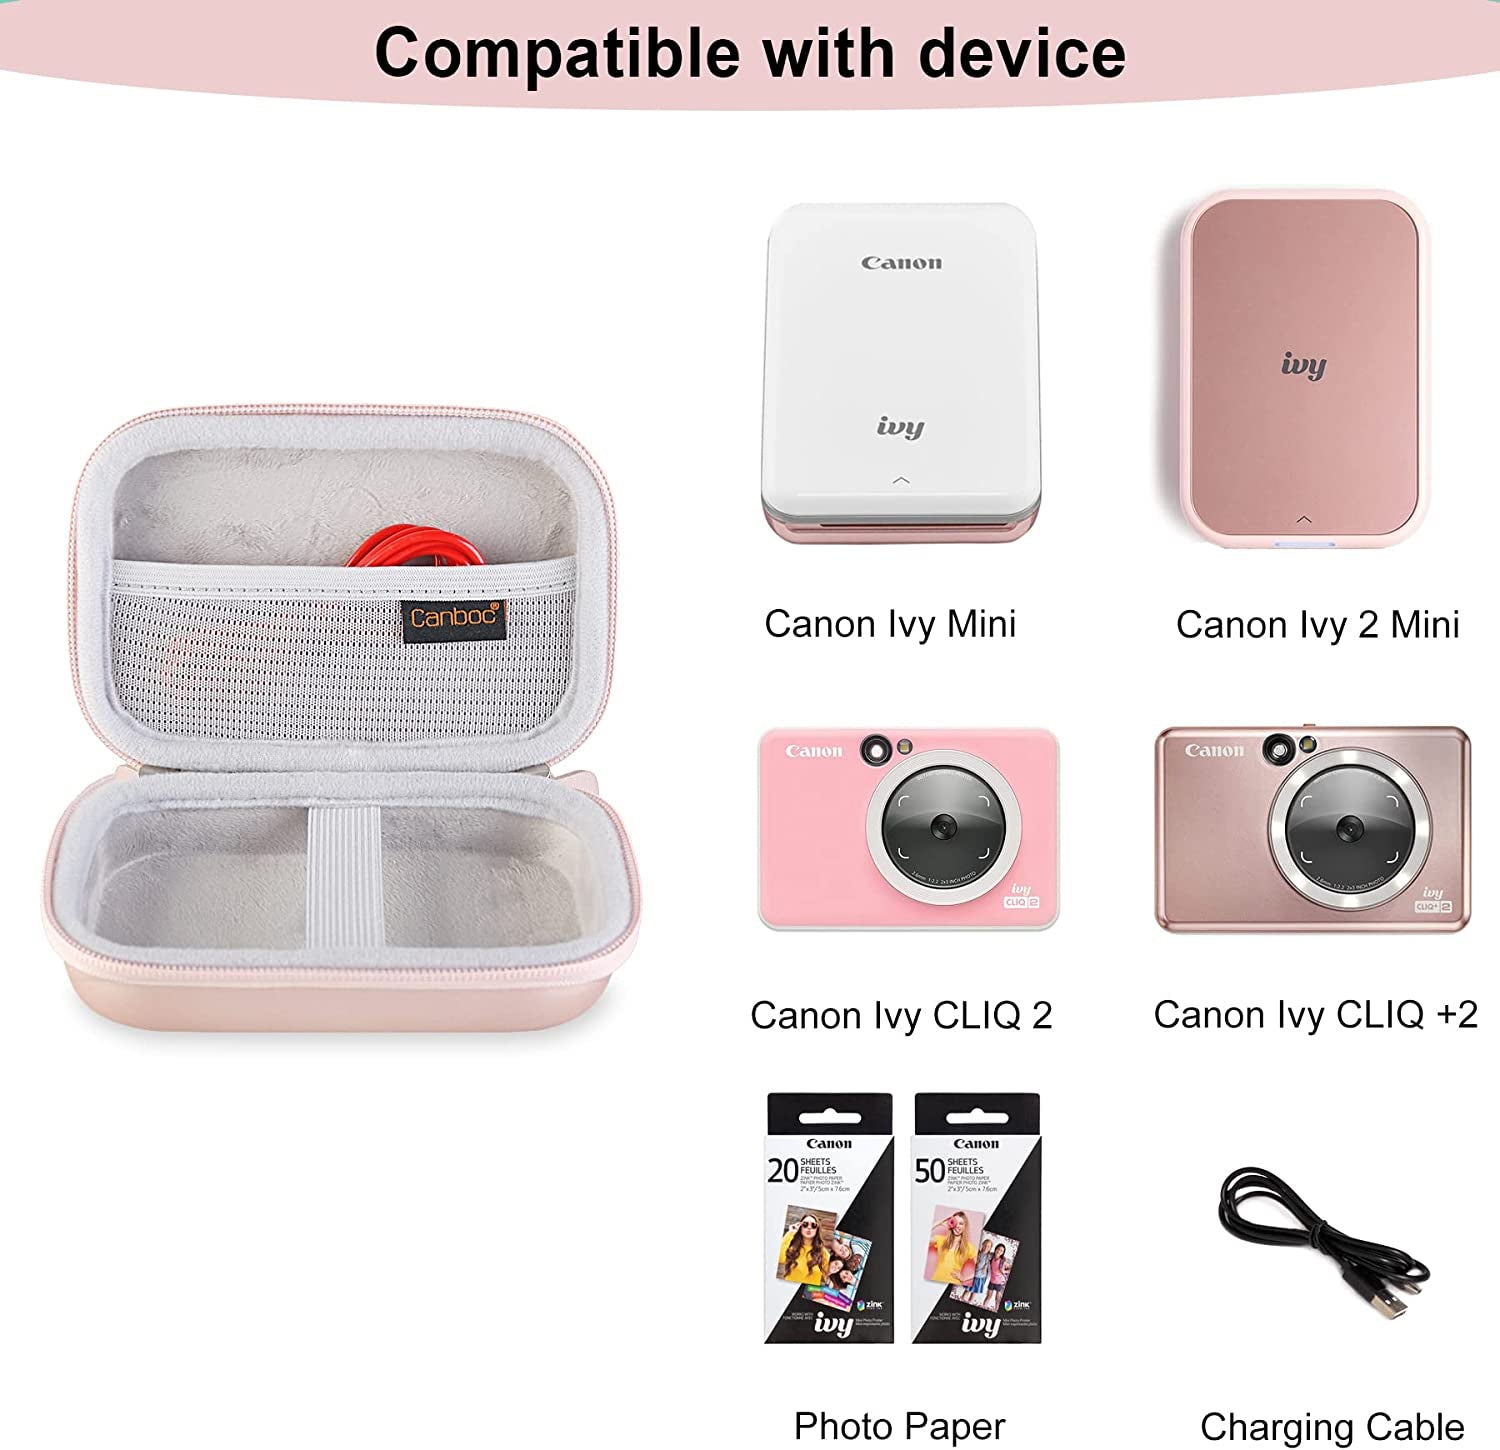 Introducing The New Canon IVY 2 Mini Photo Printer! 